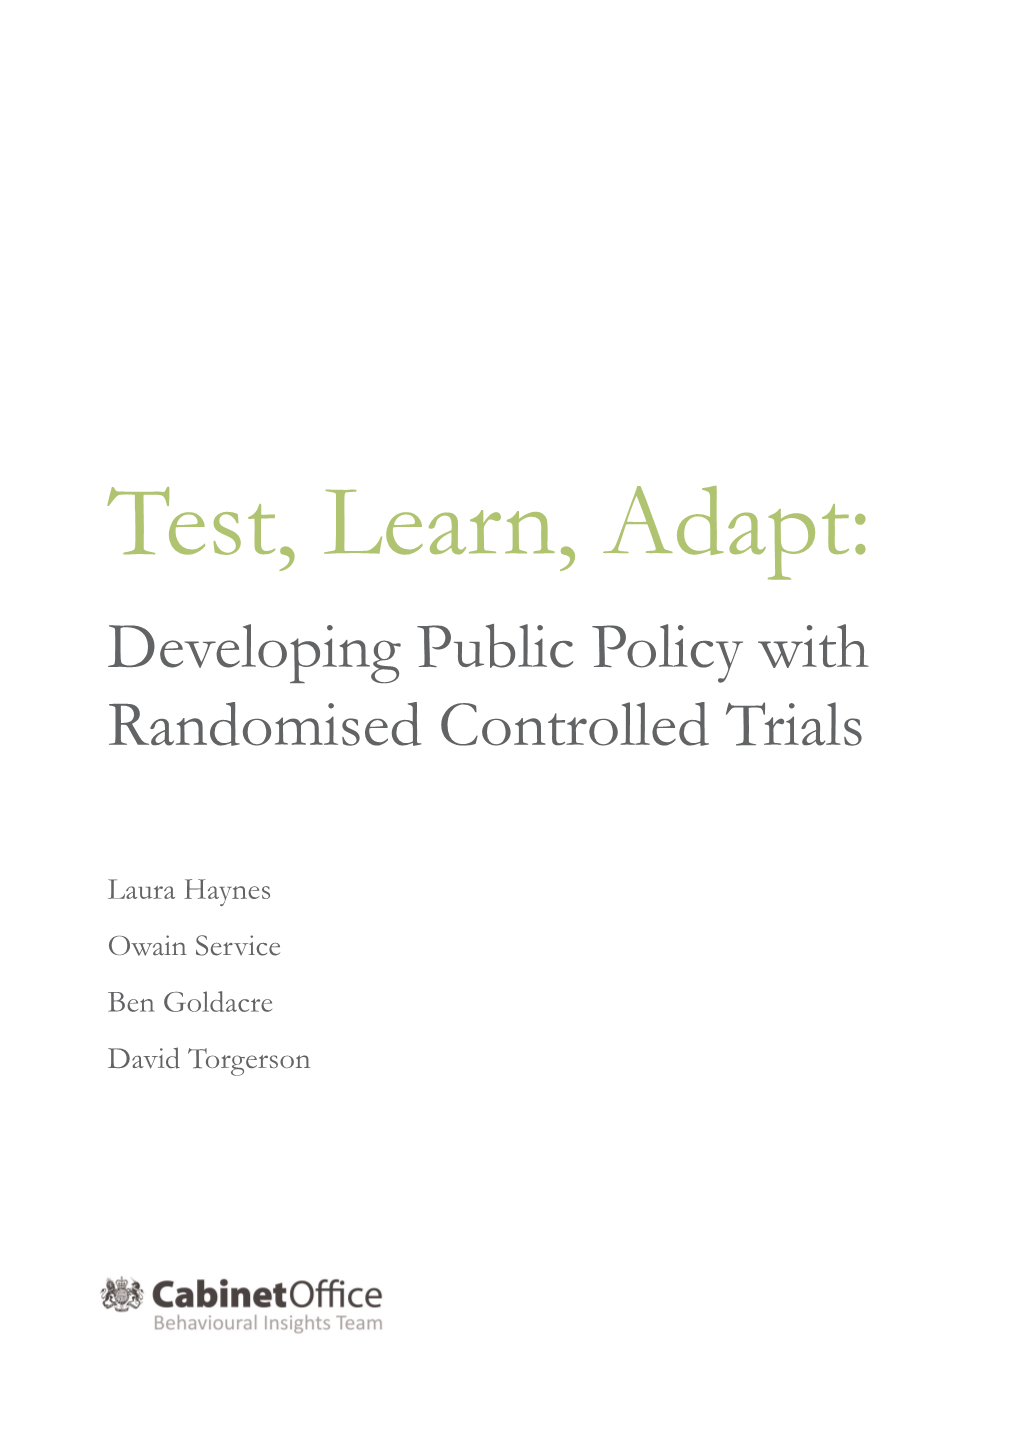 Test, Learn, Adapt: Developing Public Policy with Randomised Controlled Trials